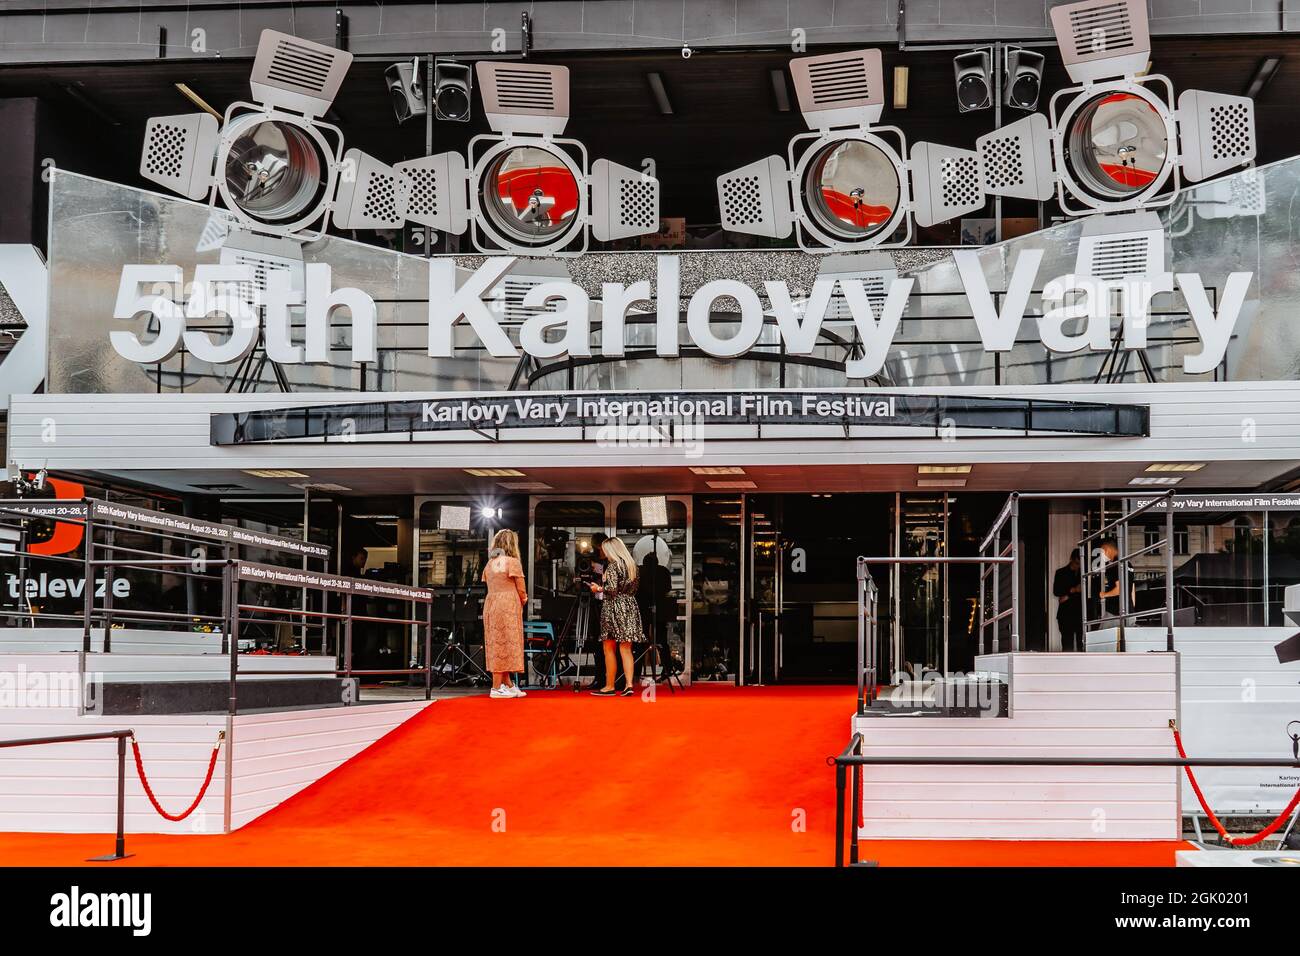 Karlovy Vary,Czech Republic - August 20,2021. Entrance with red carpet to famous Hotel Thermal during 55th International Film Festival.Important socia Stock Photo